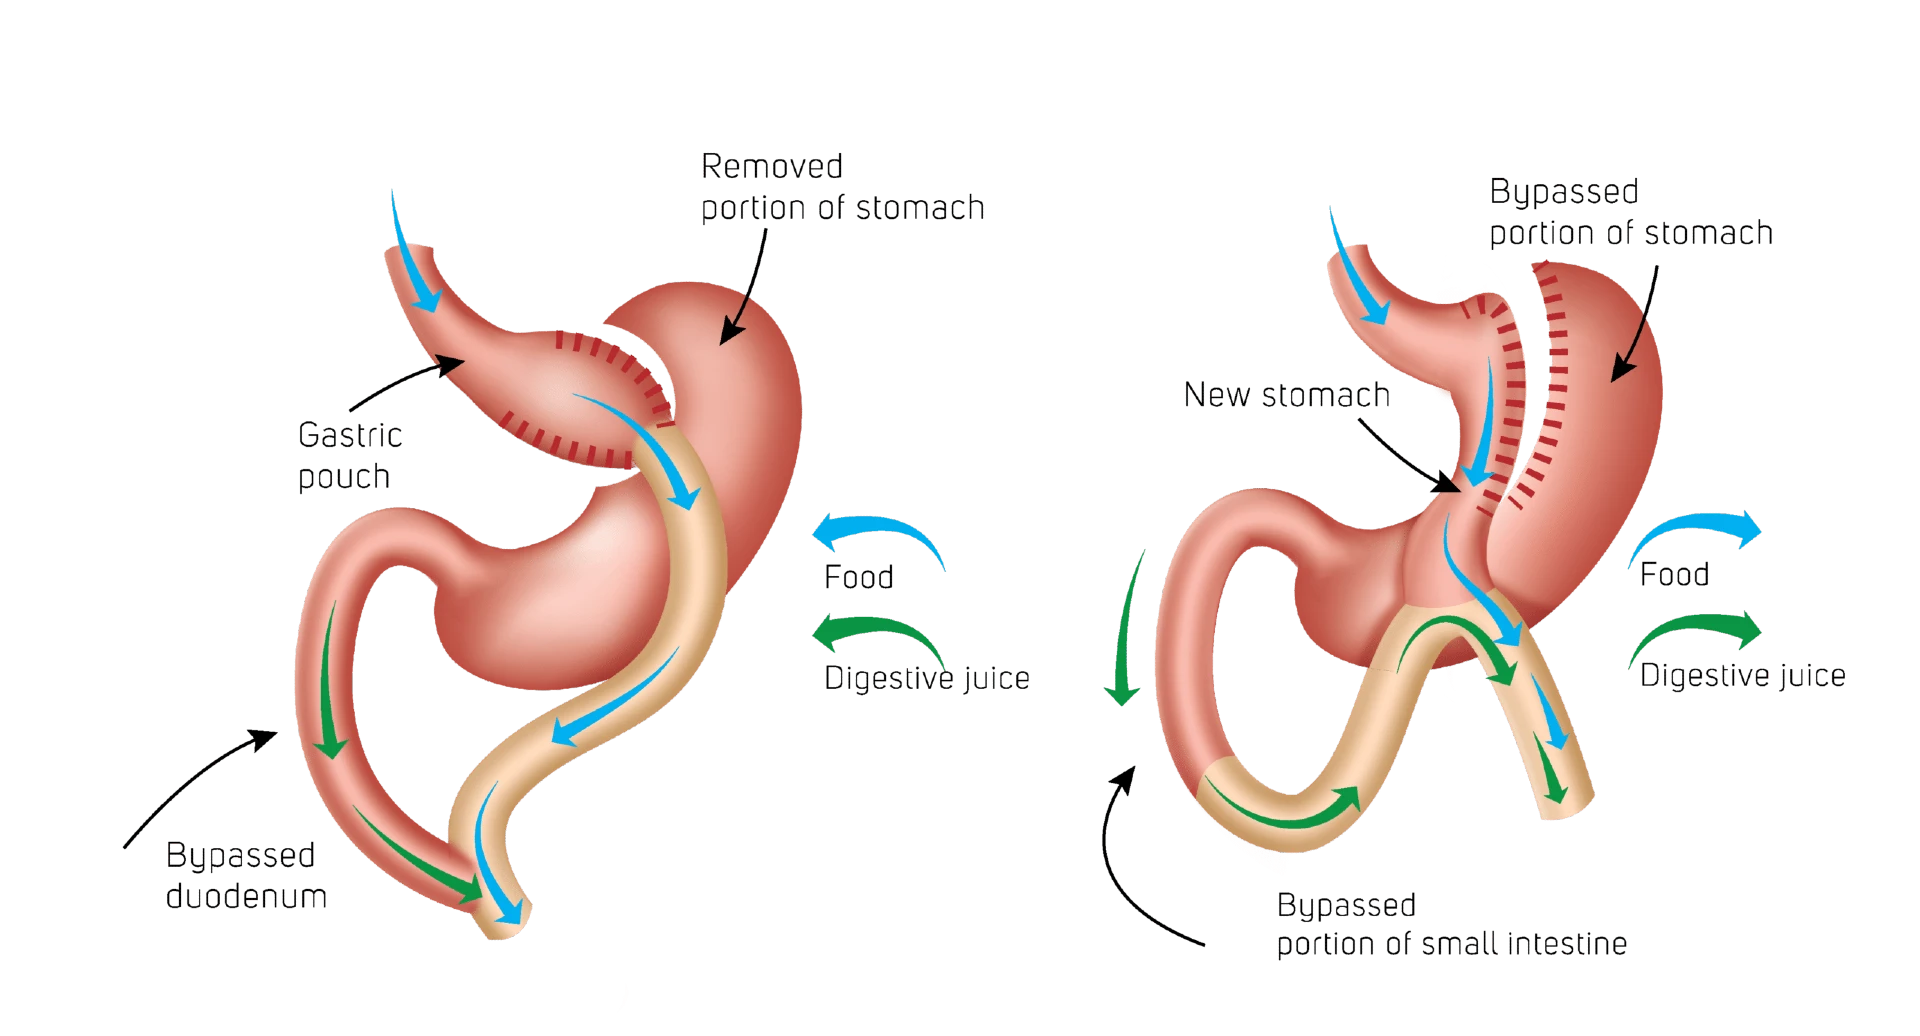 Difference Between mini gastric bypass and roux en y